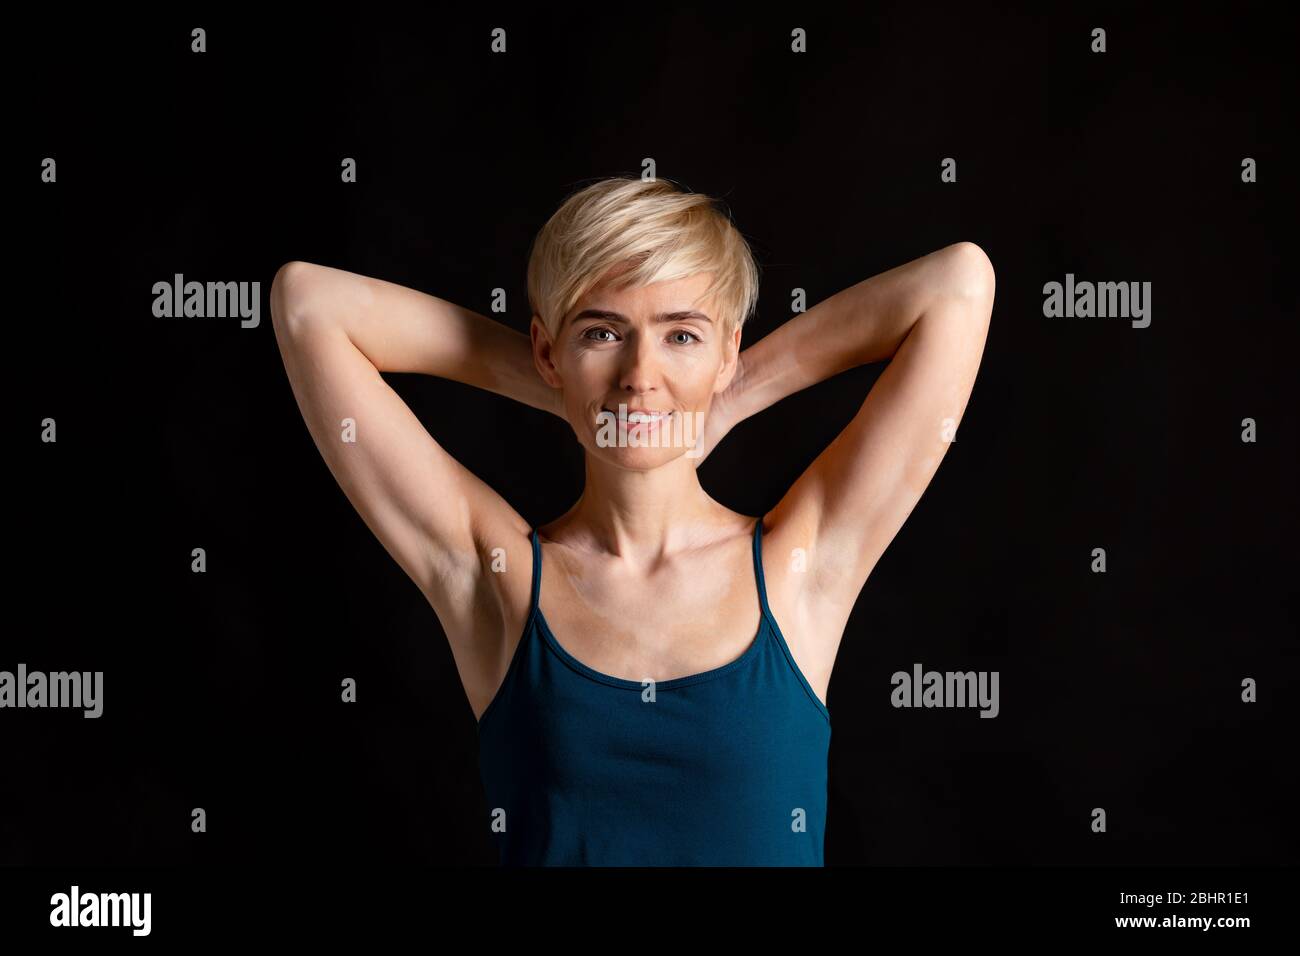 Distinctive feature. Woman with spots on body Stock Photo